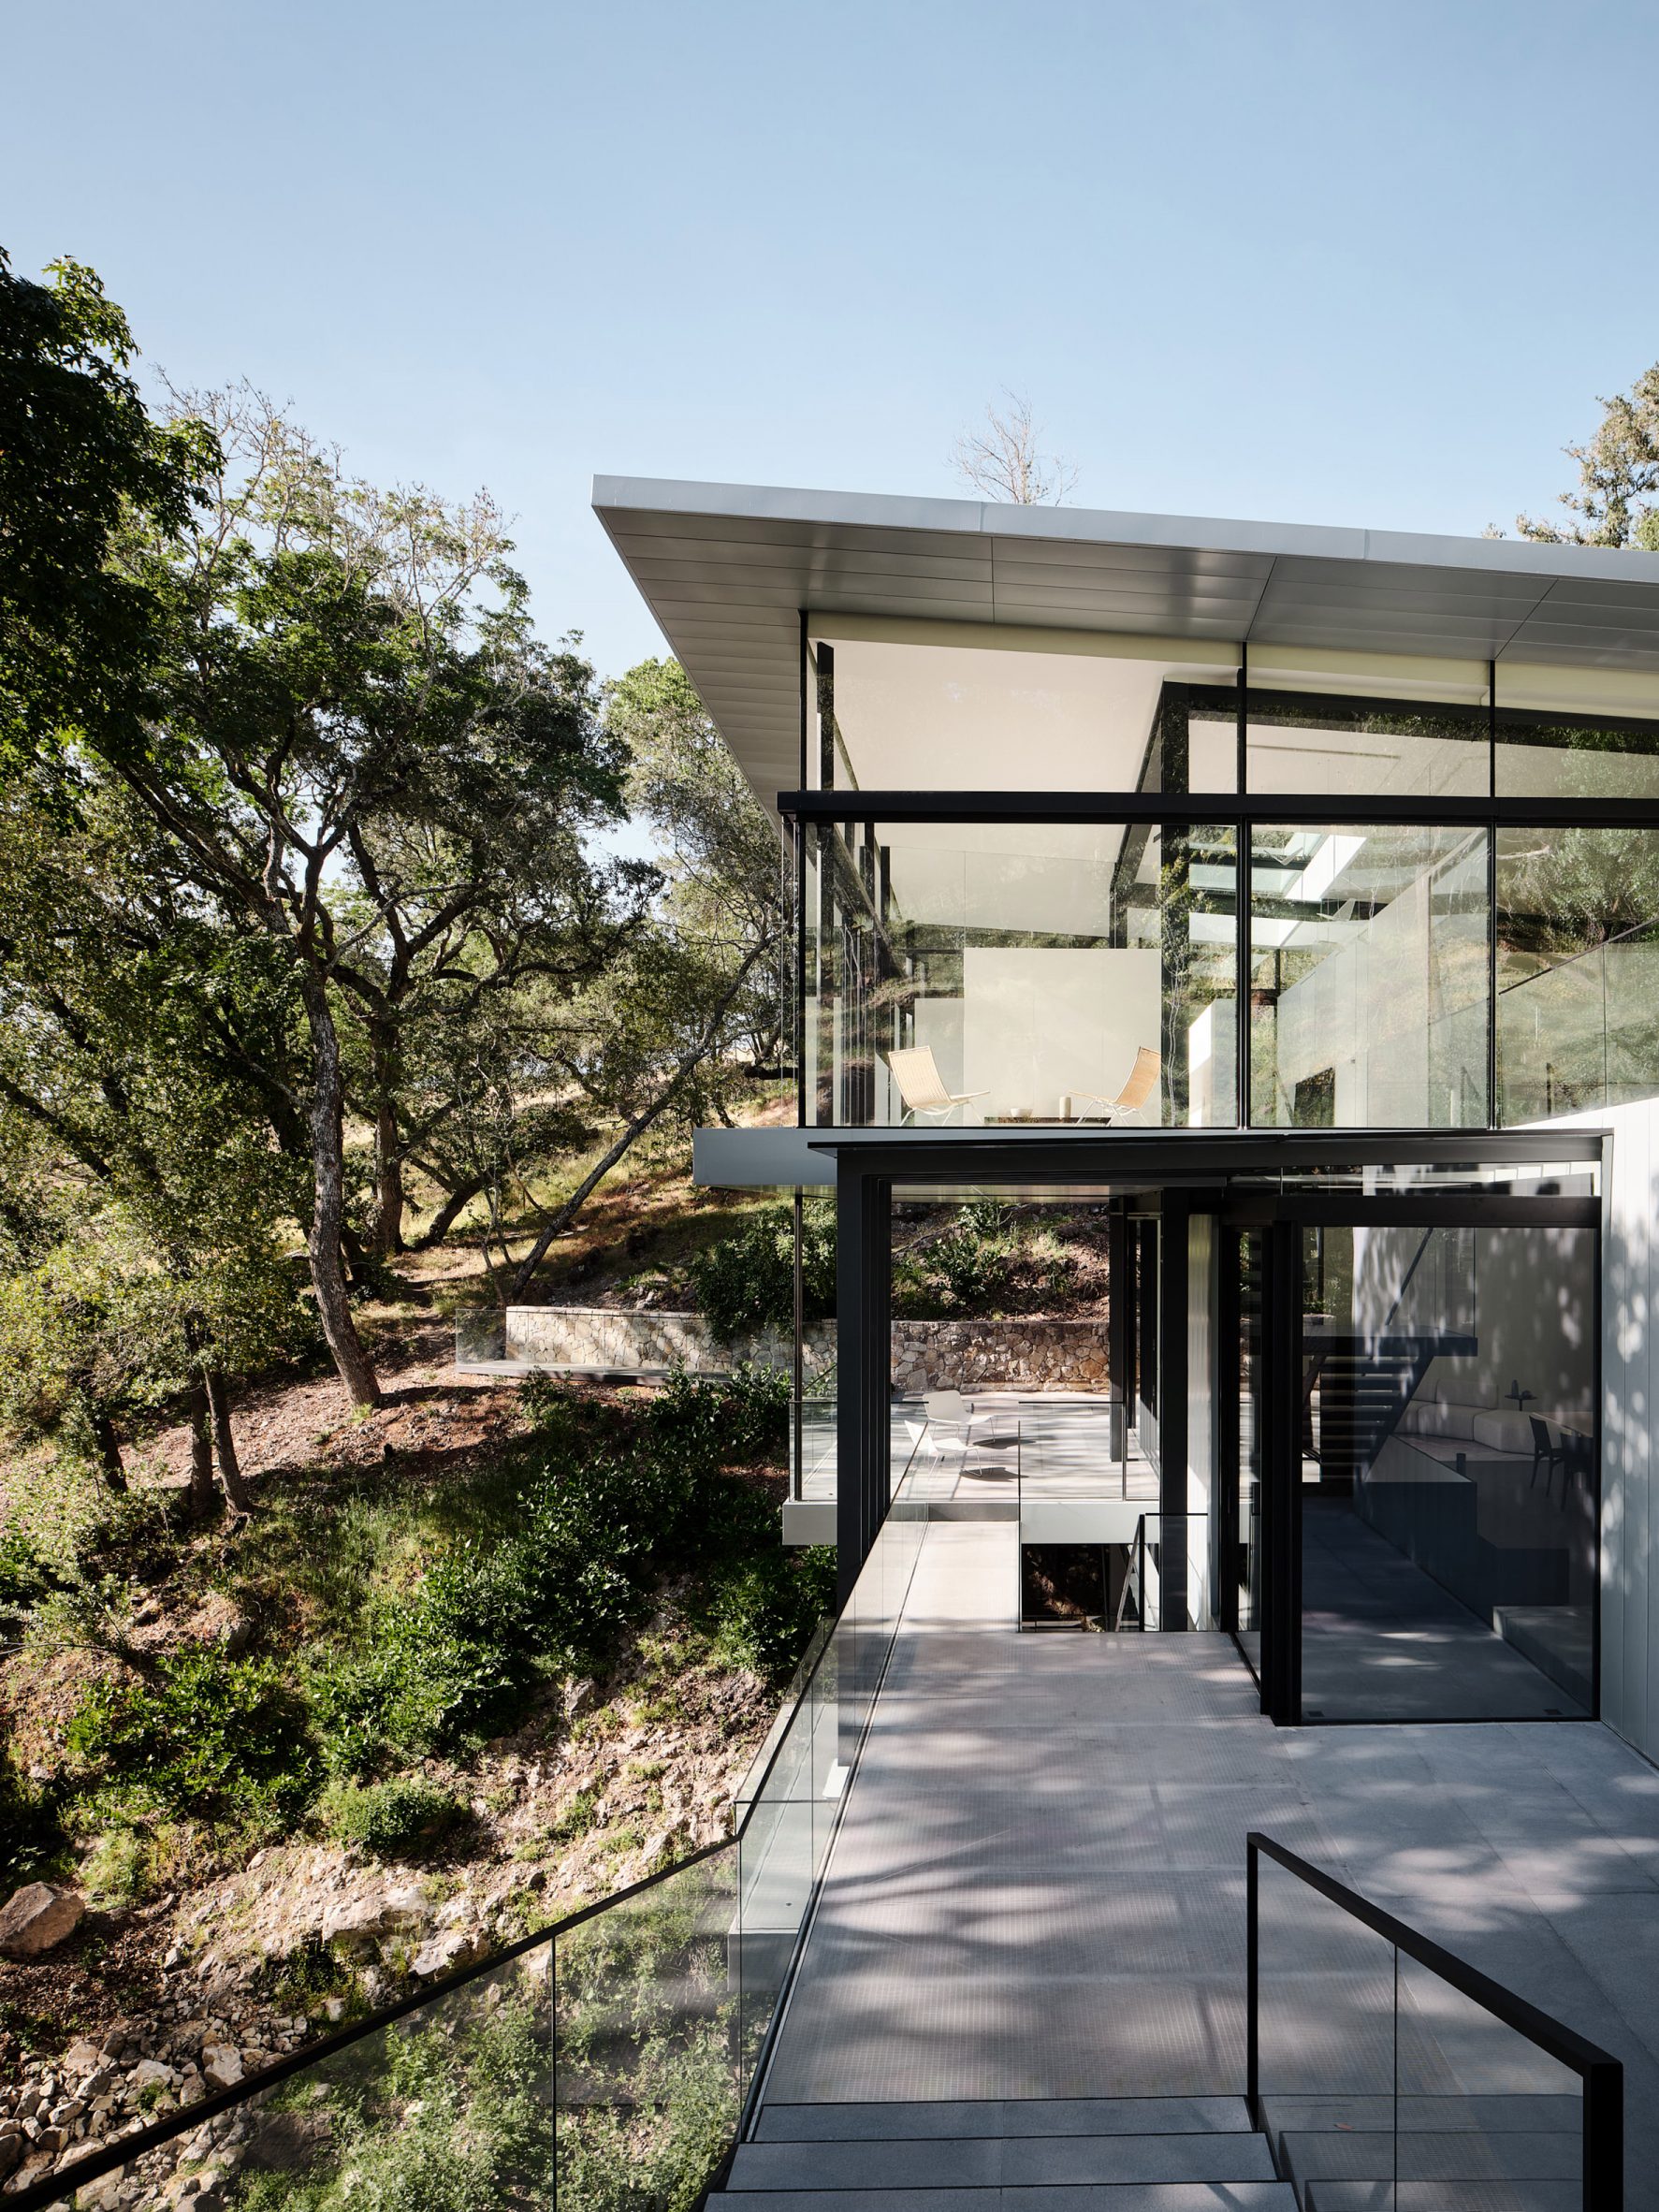 Suspension House by Fougeron Architecture in forested creek with sloped roof and glass walls